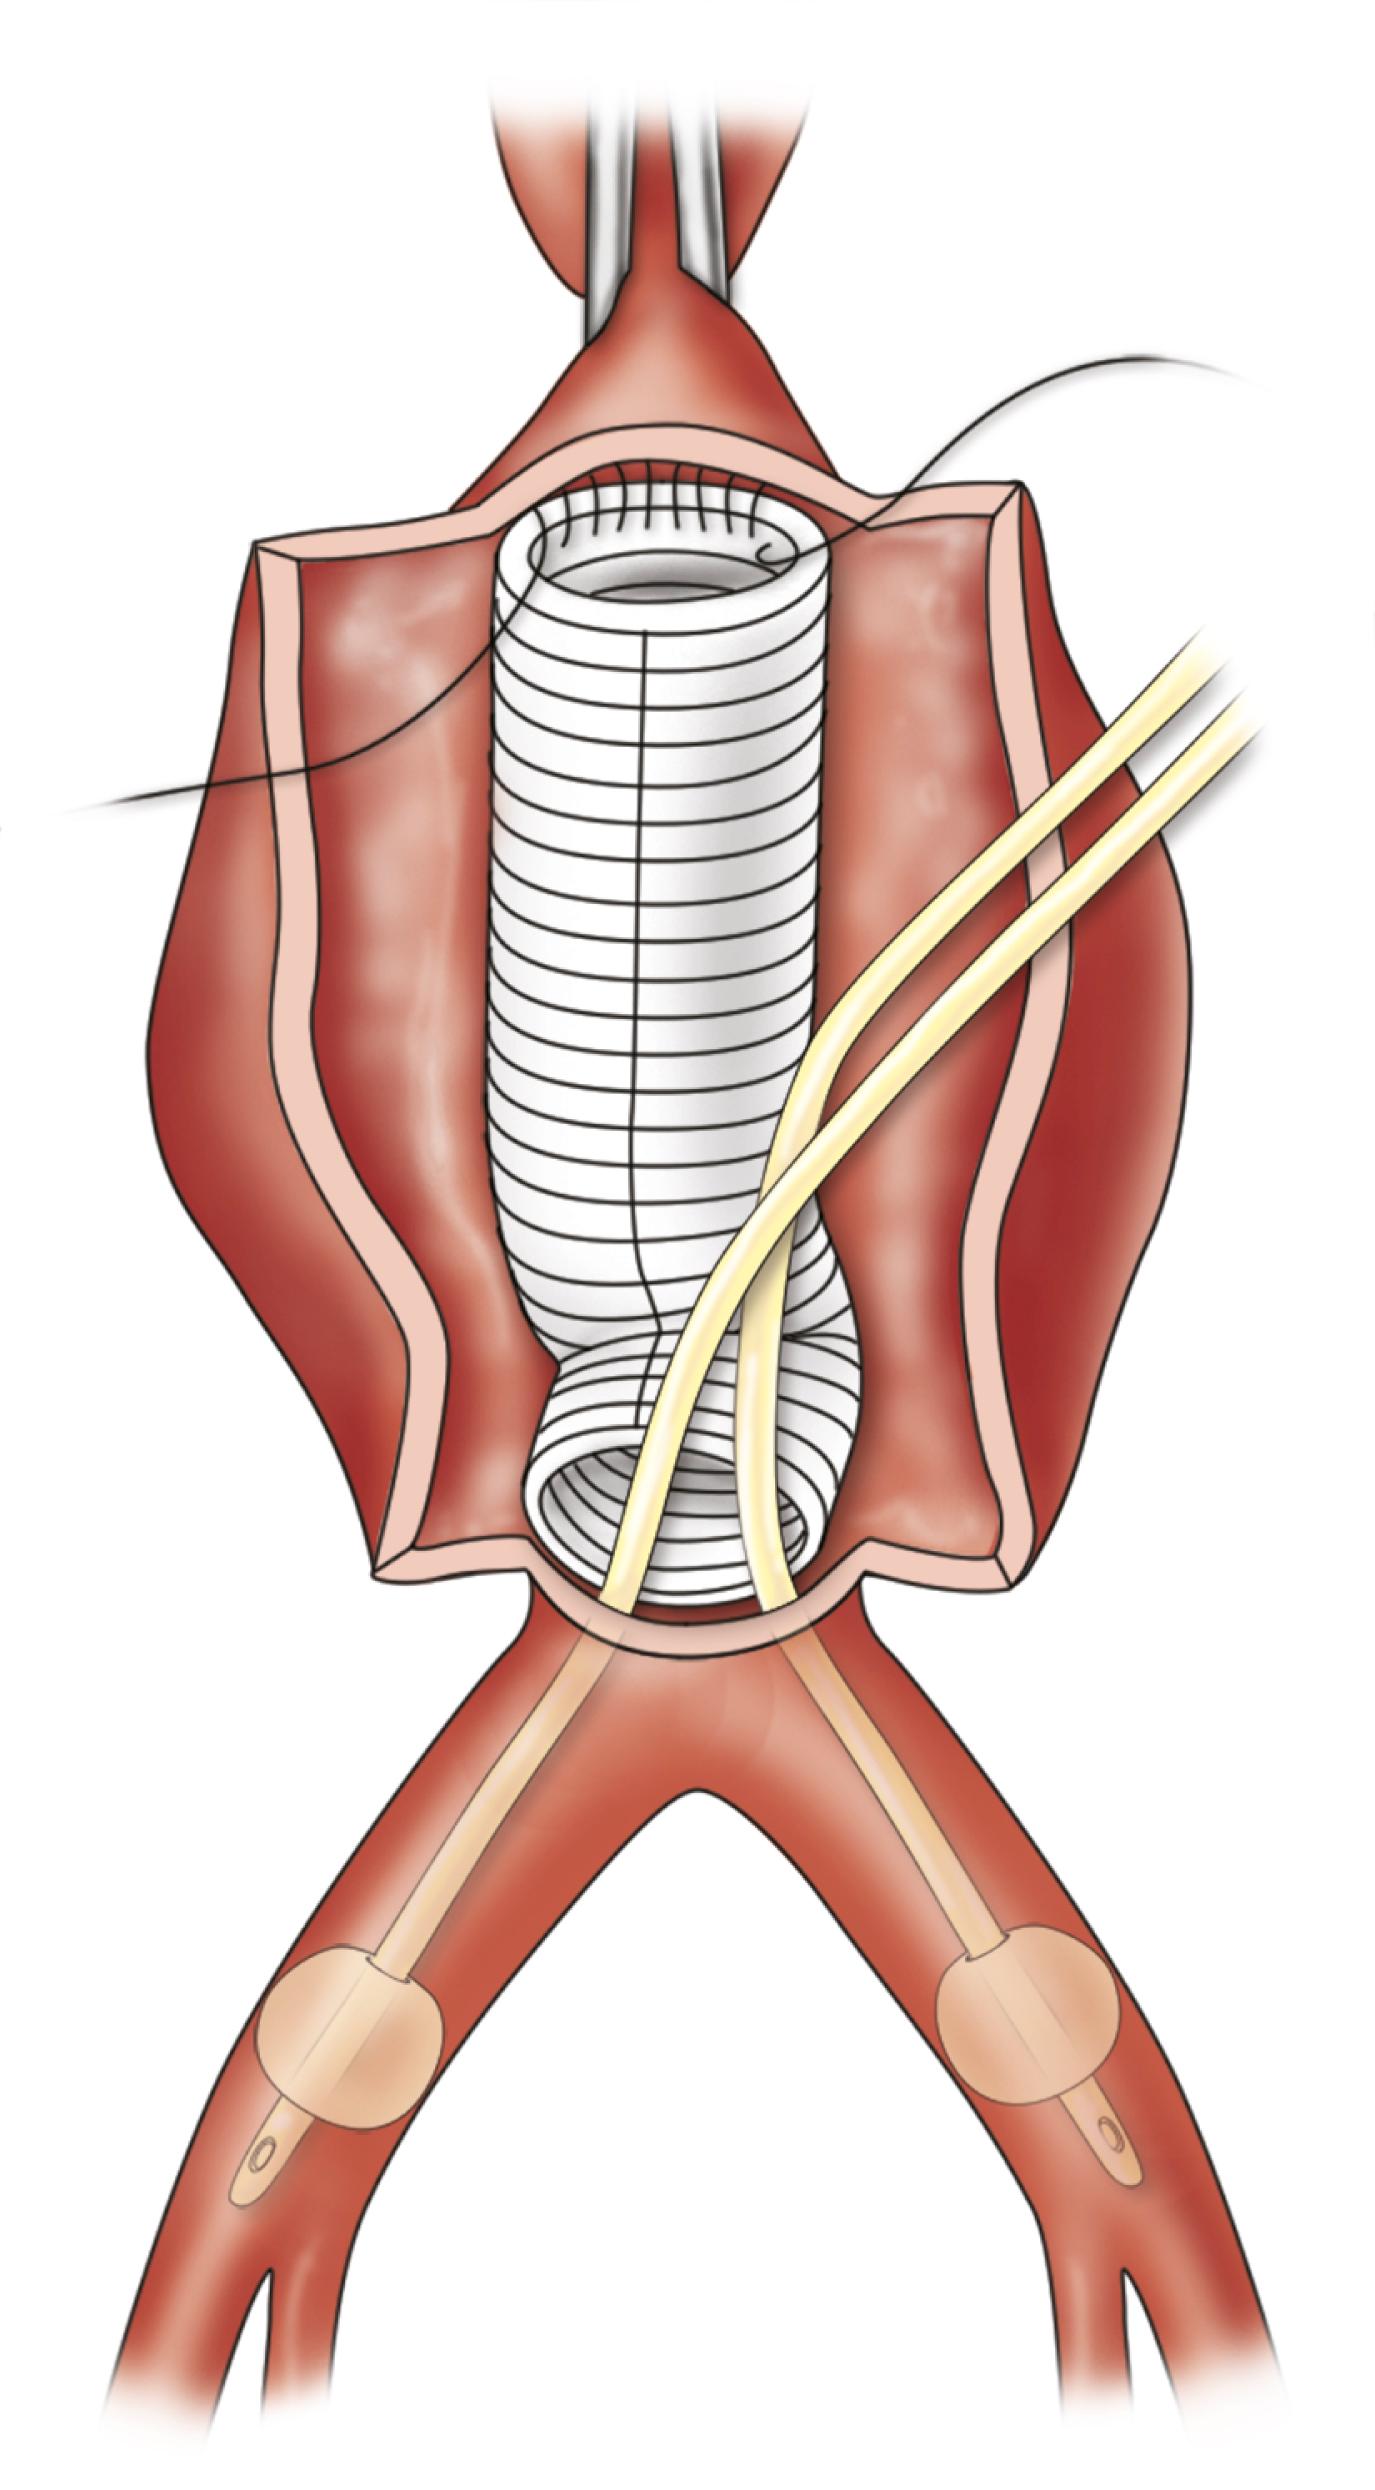 Figure 73.5, Technique of endoluminal control of common iliac arteries. Foley catheters are inserted under direct visualization and inflated enough to arrest back-bleeding.